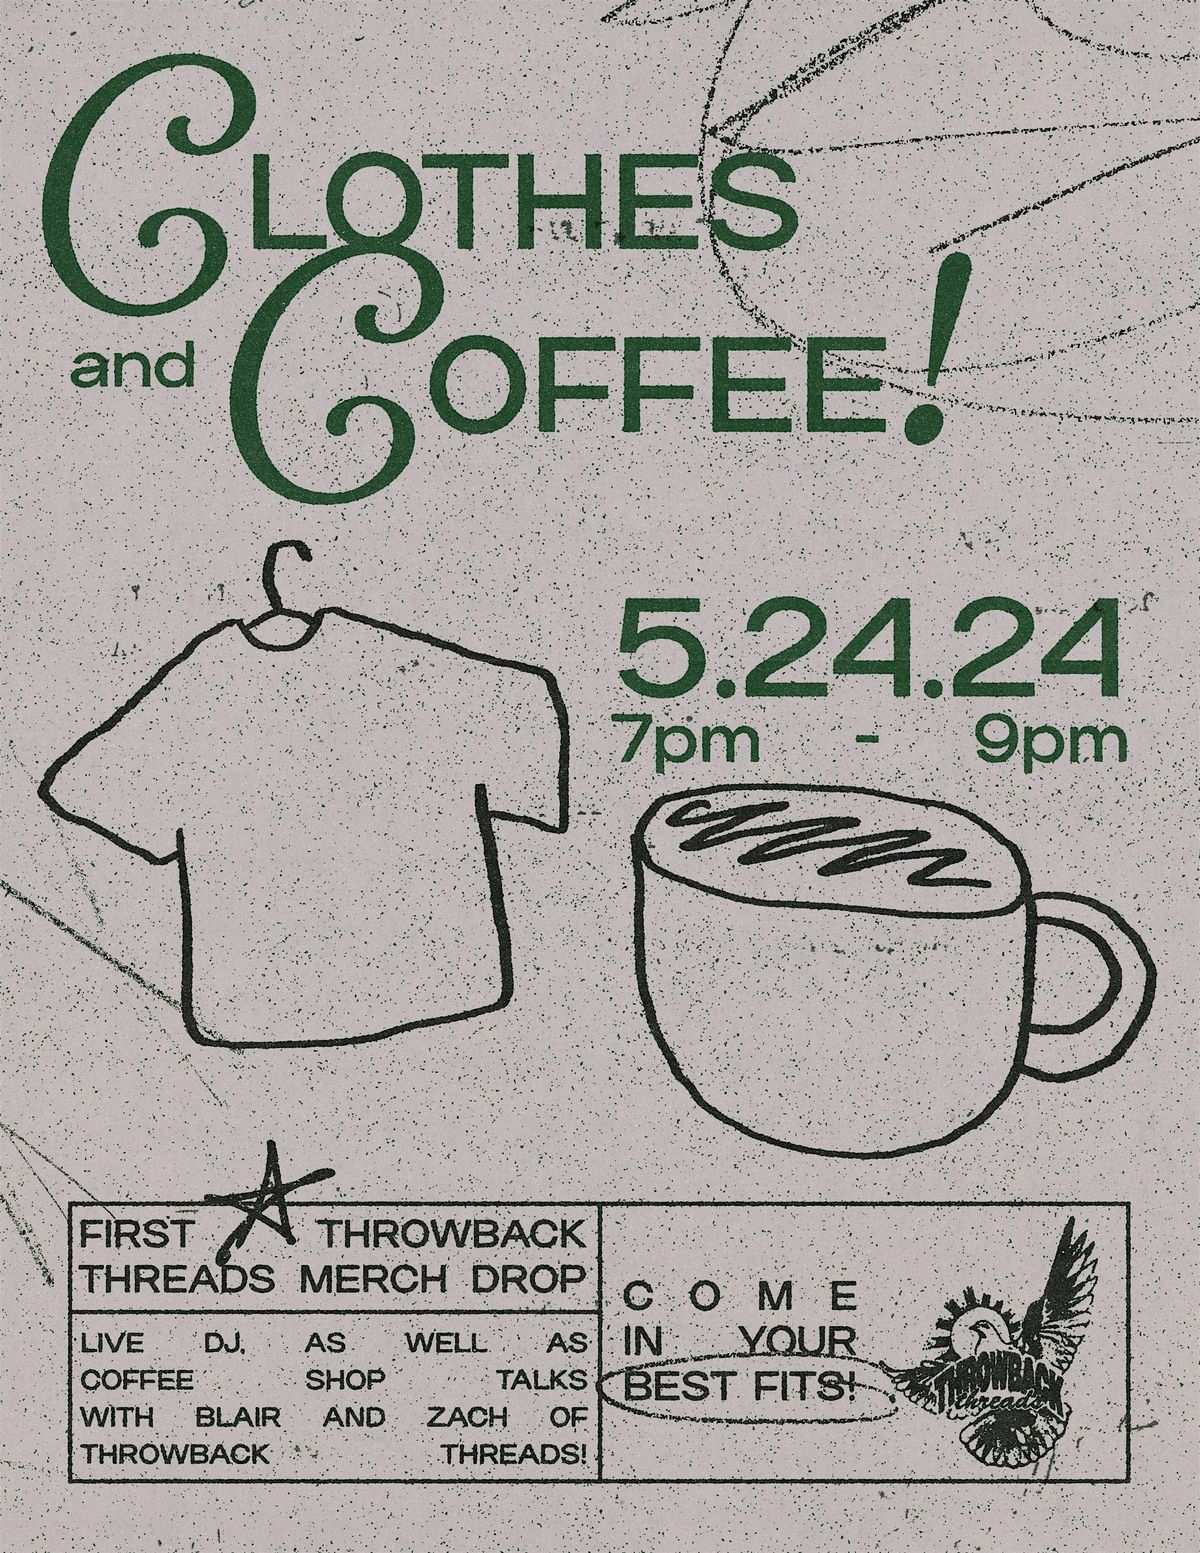 Throwback Threads presents: Clothes and Coffee